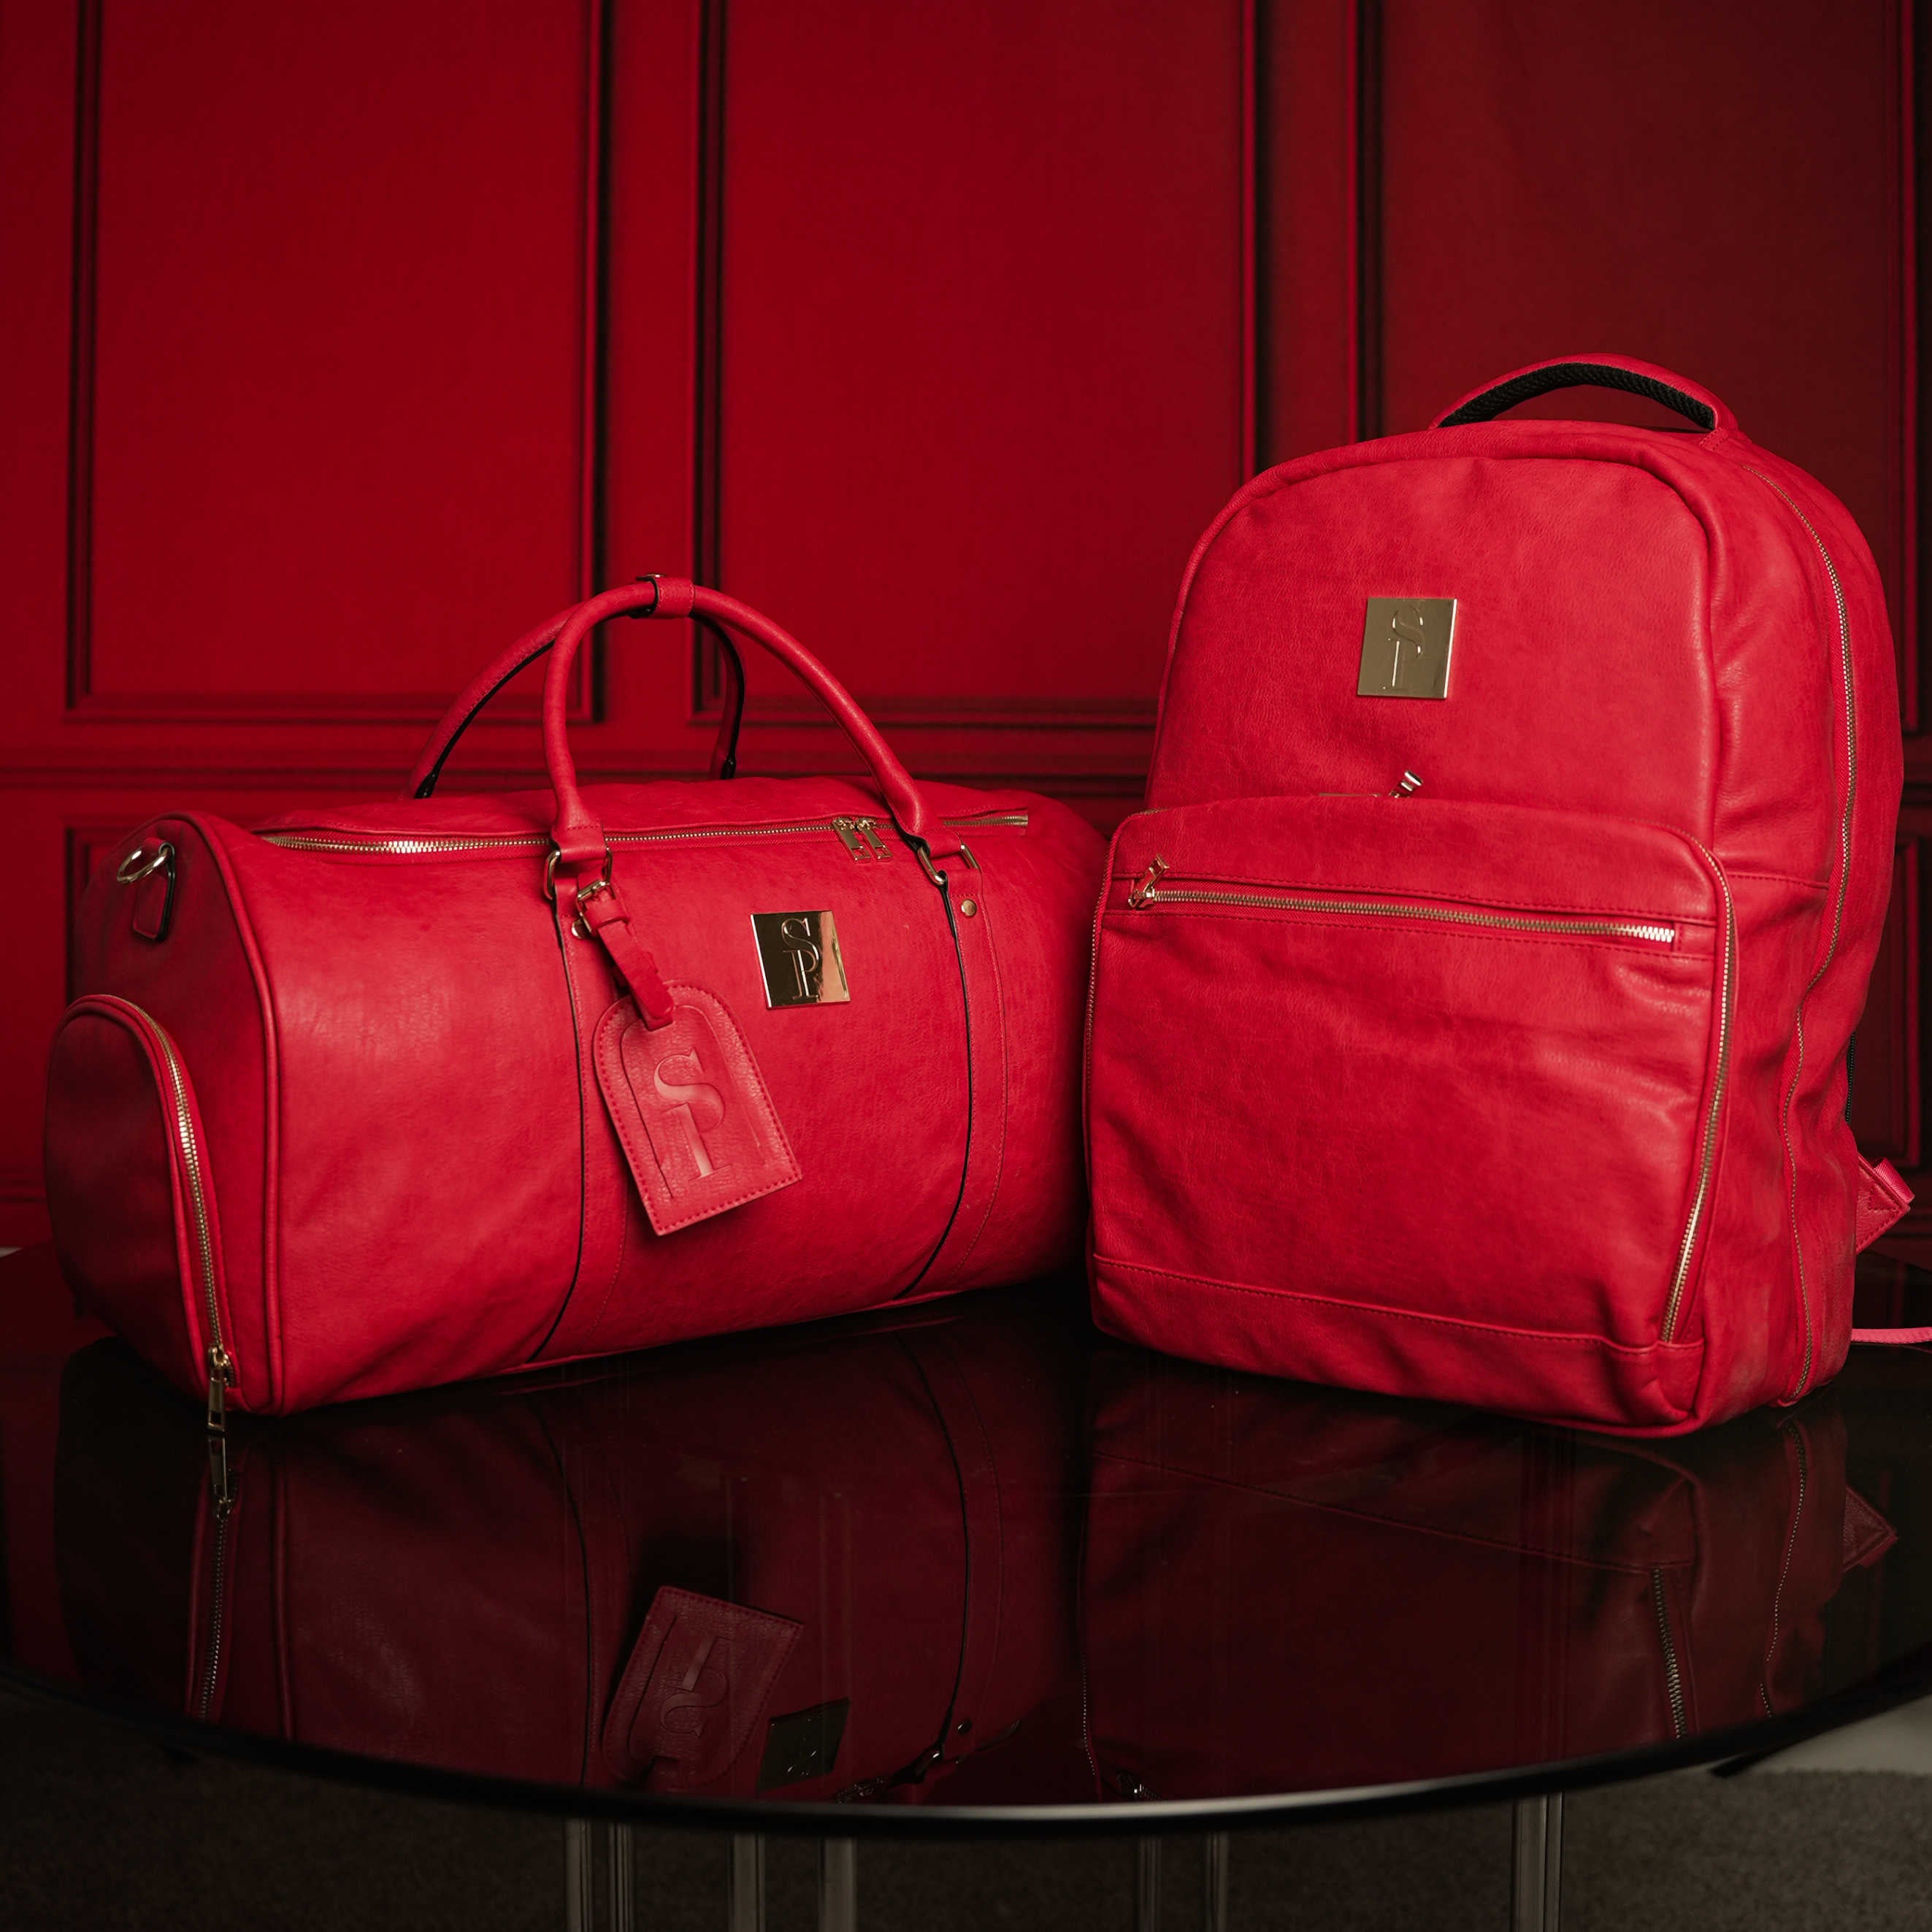 Red Tumbled Leather 2 Bag Set (Commuter and Duffle)